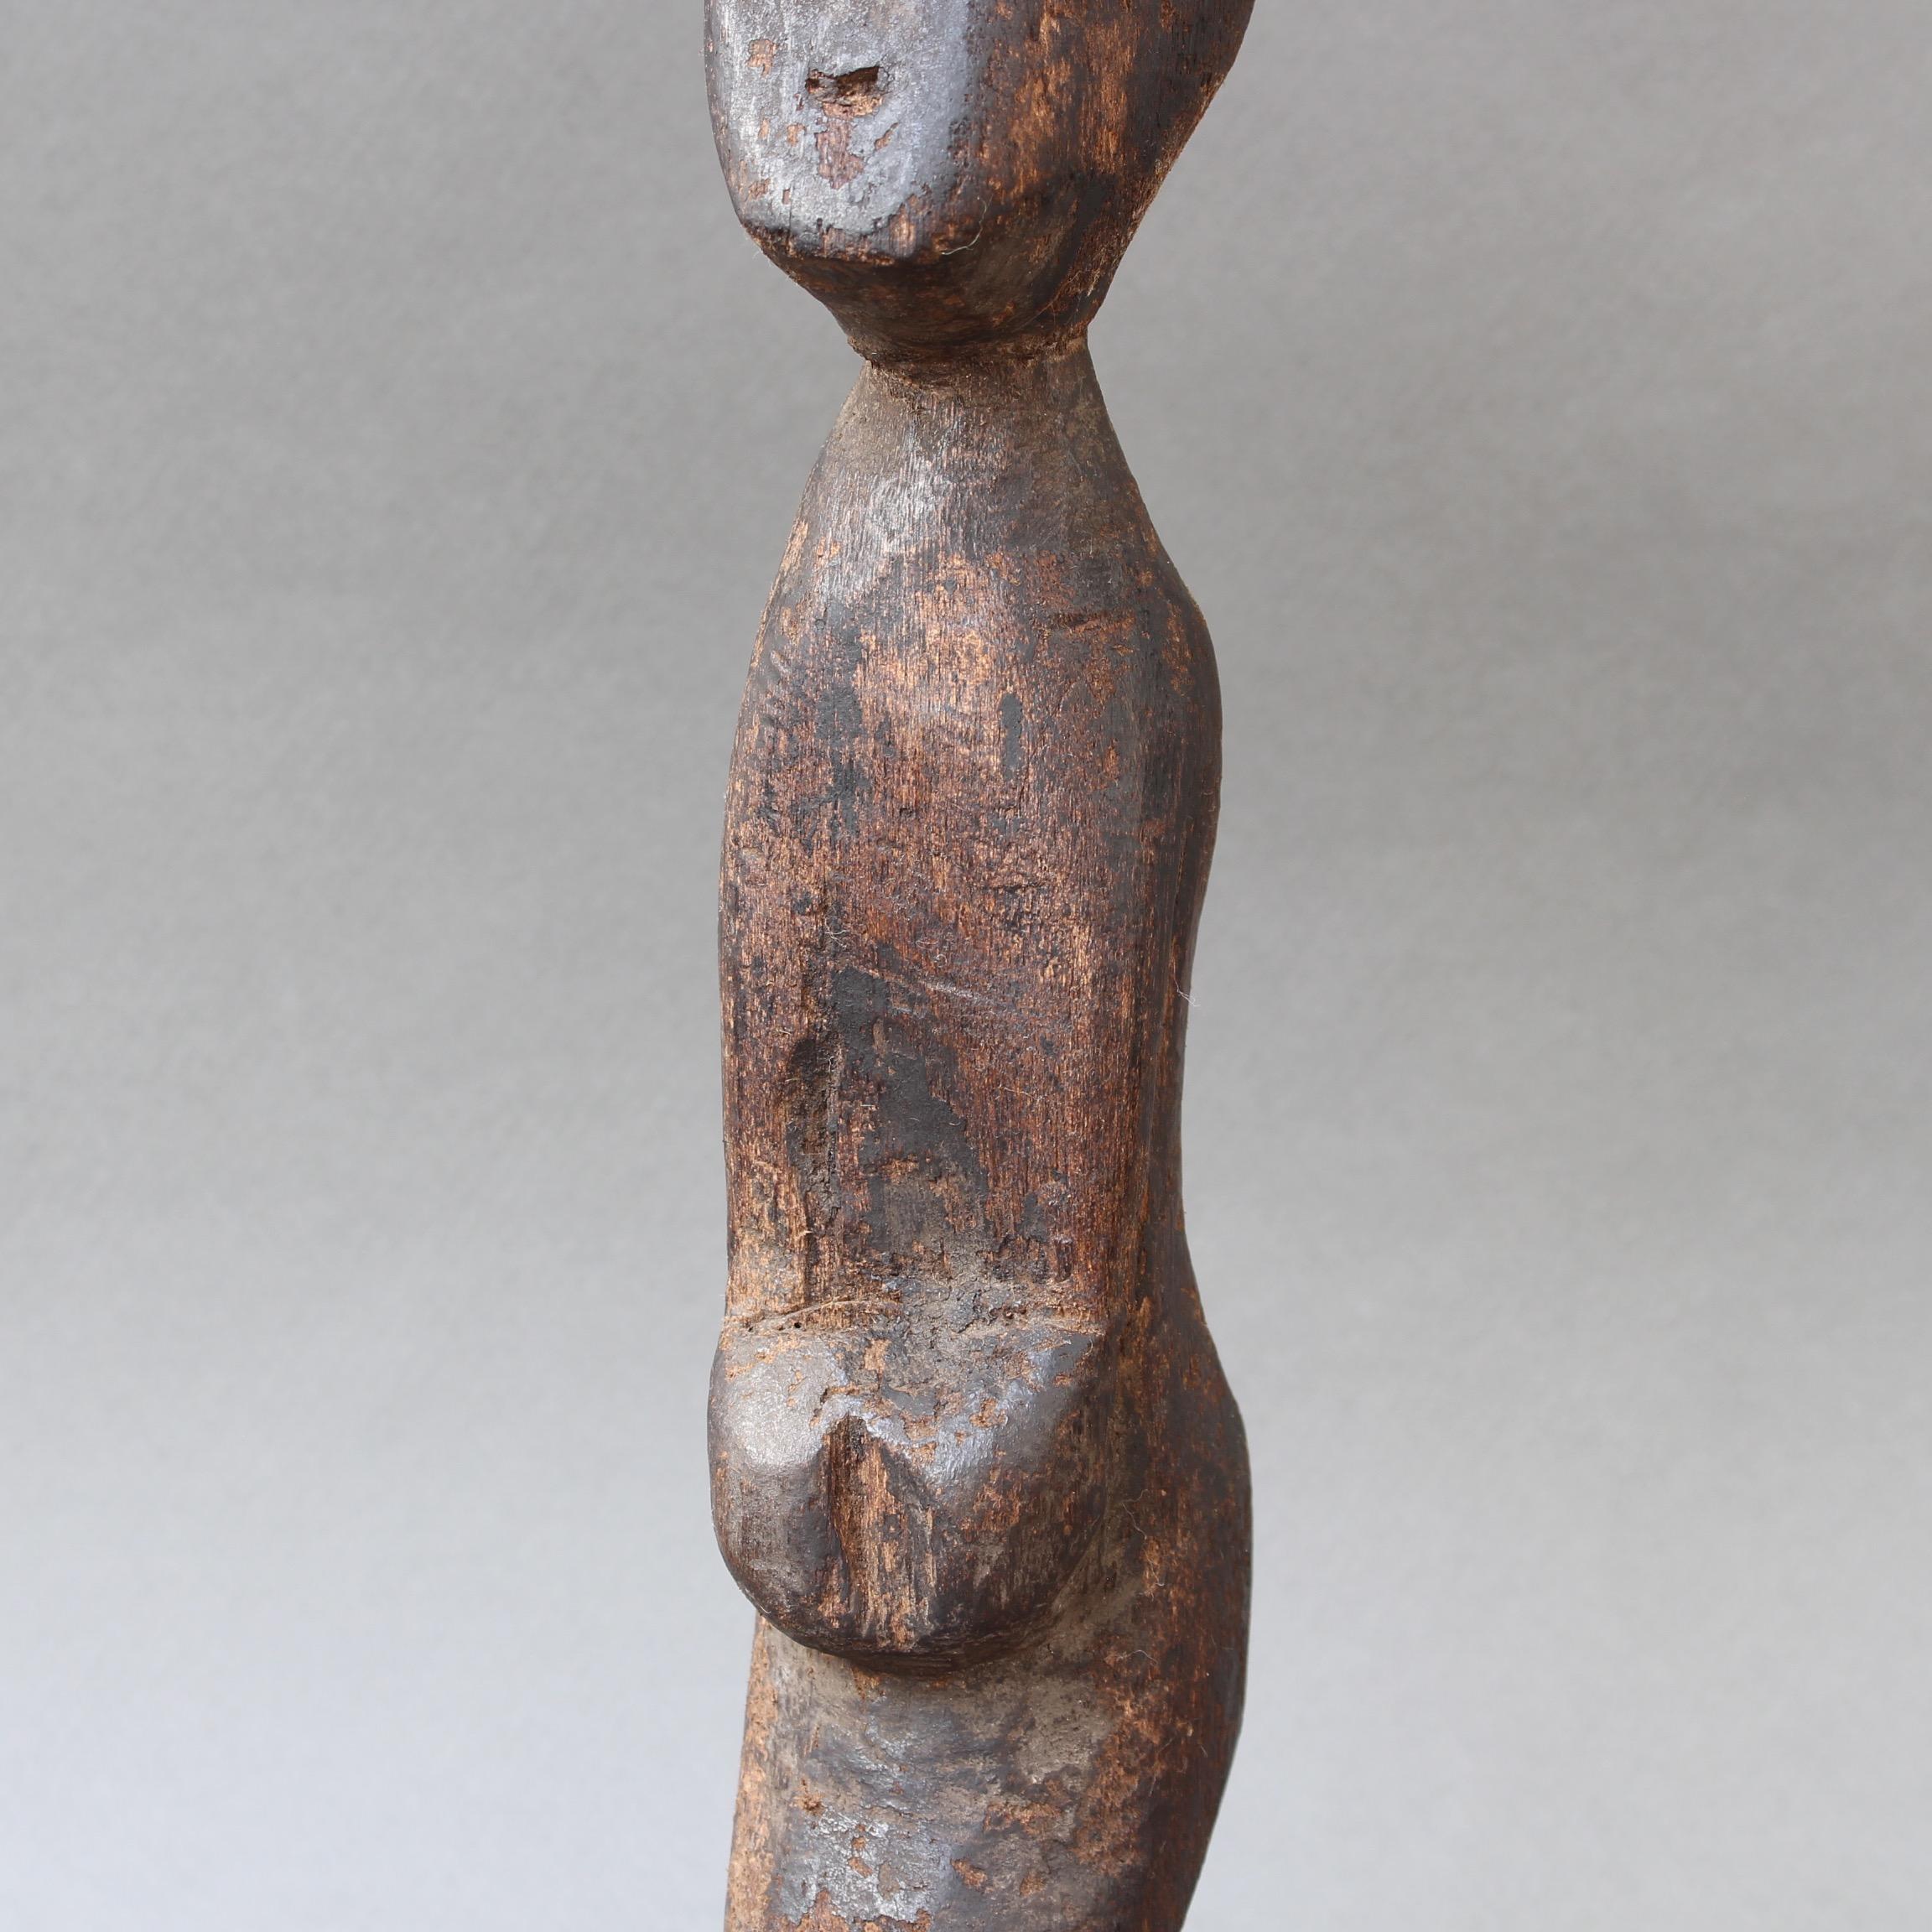 Wooden Carving / Sculpture of Kneeling Wooden Figure from Timor, Indonesia 5